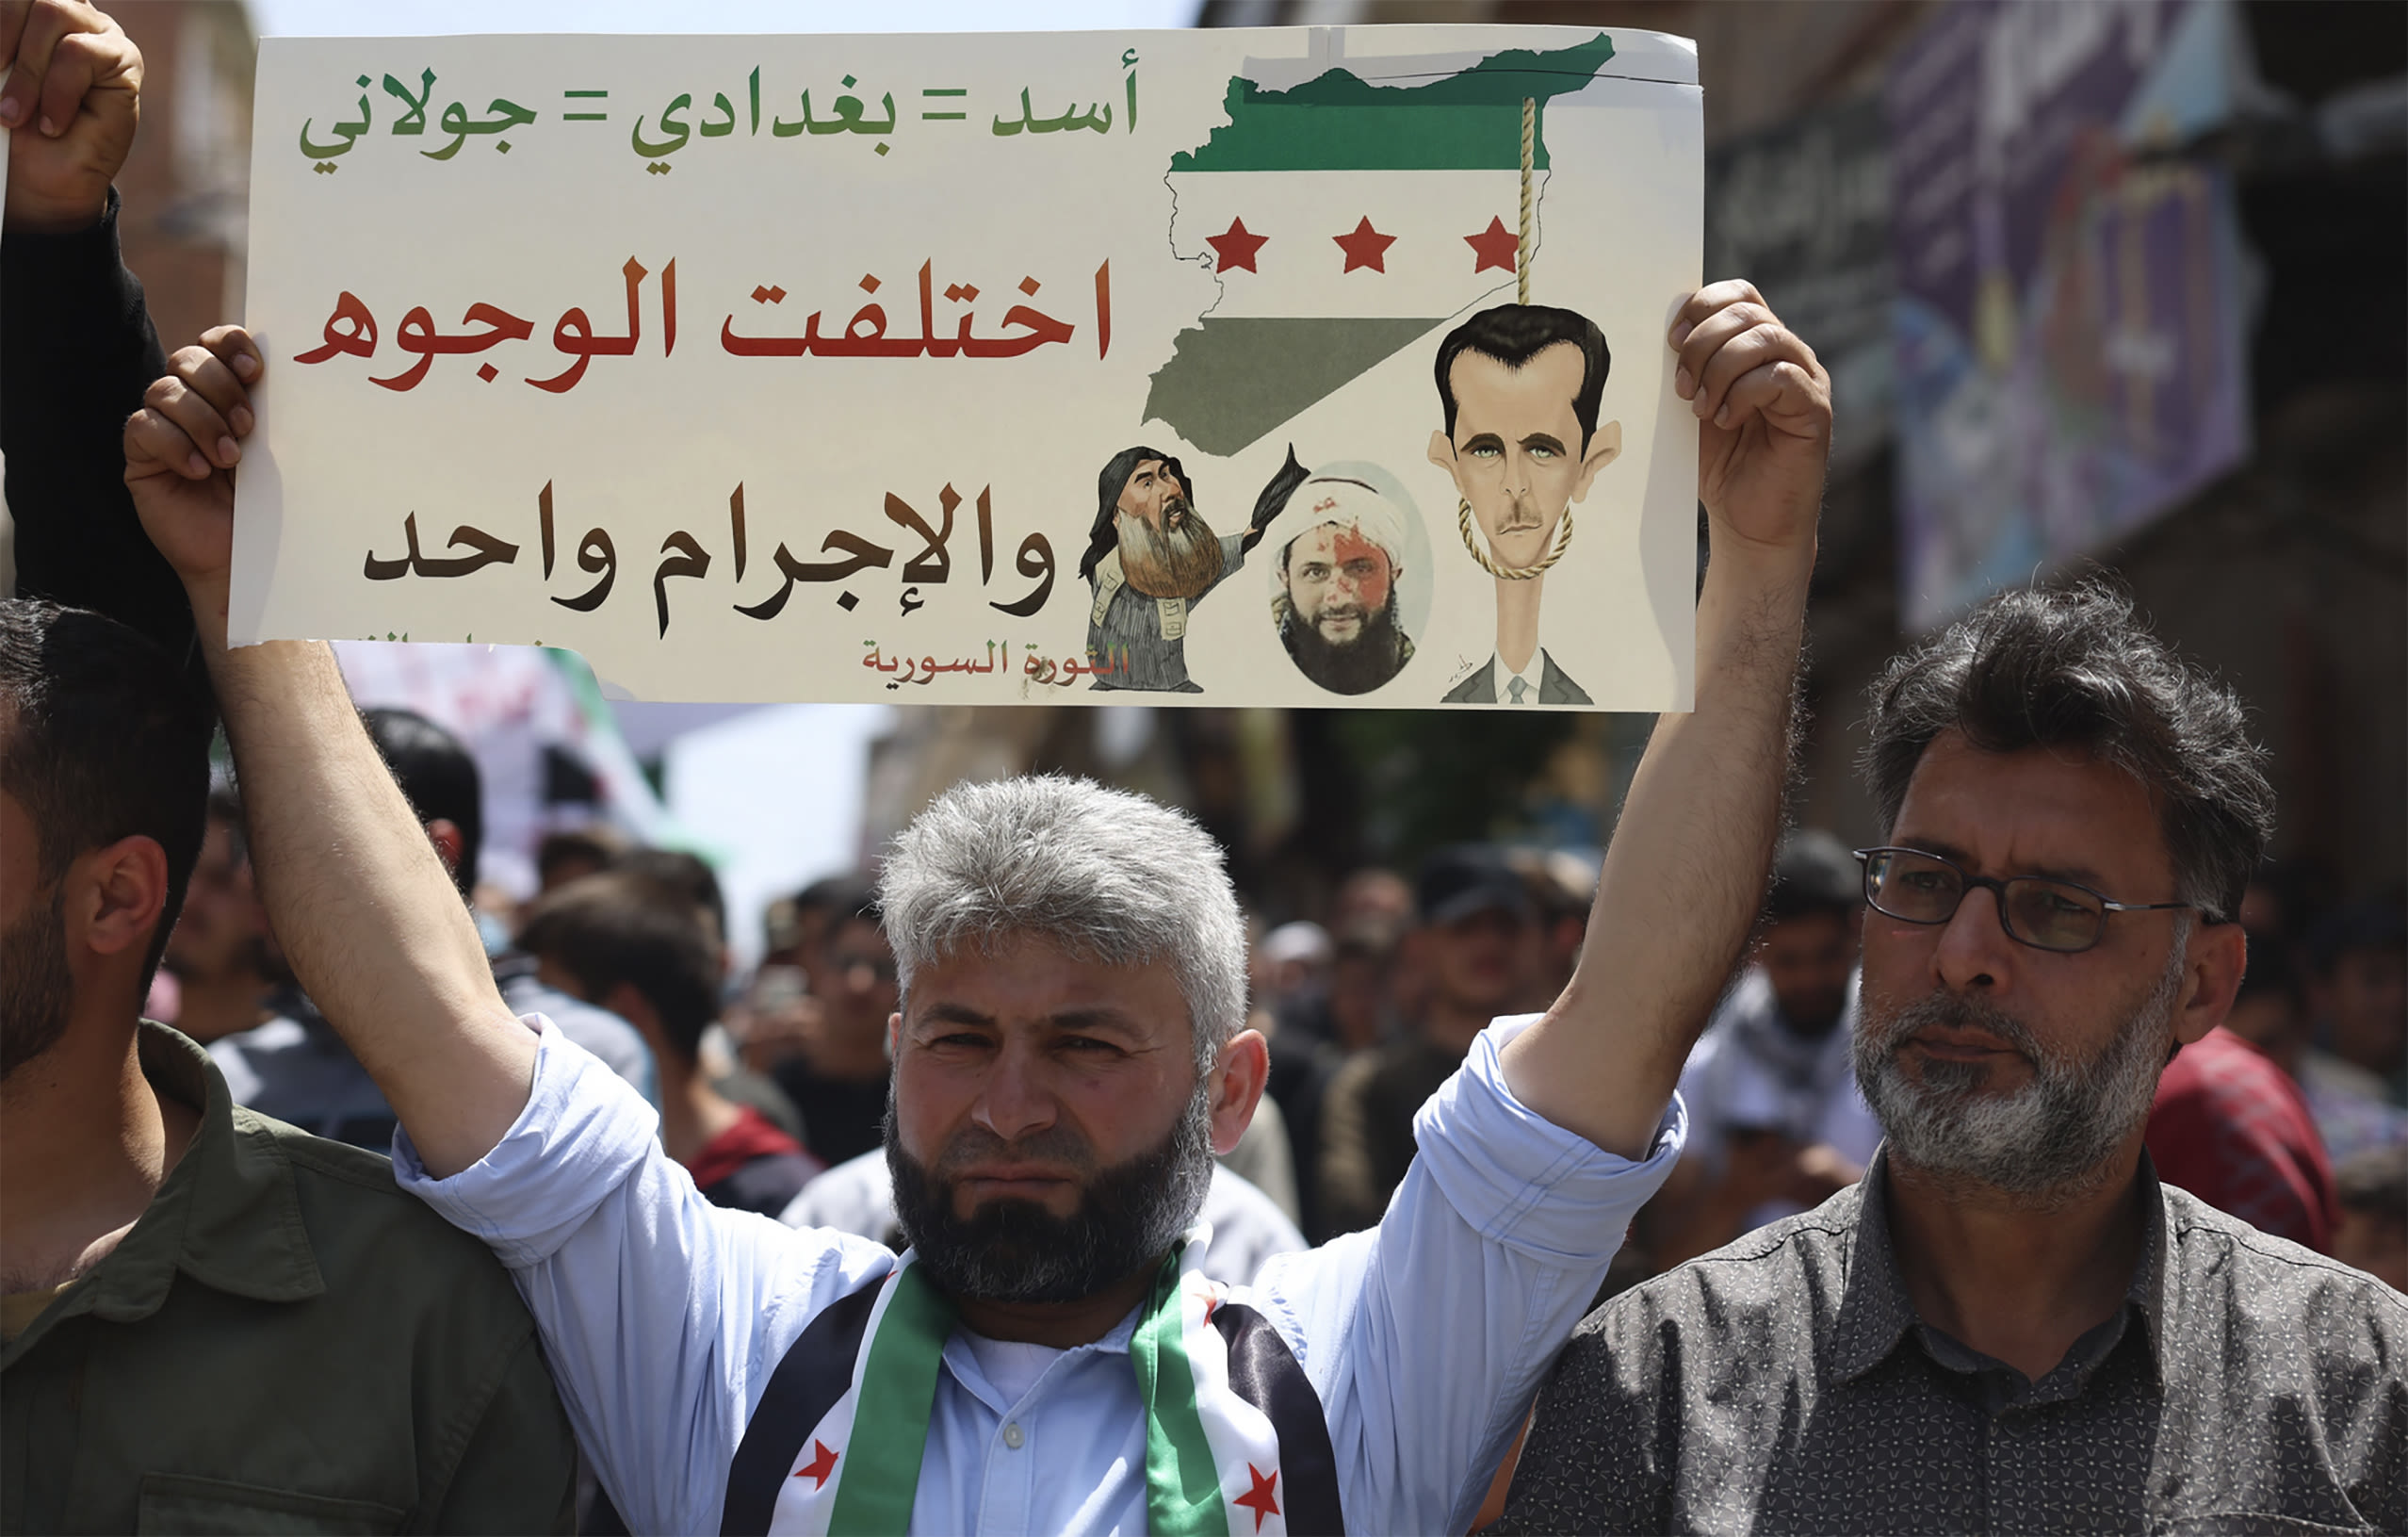 Protests against powerful group persist in Syria's last major rebel stronghold